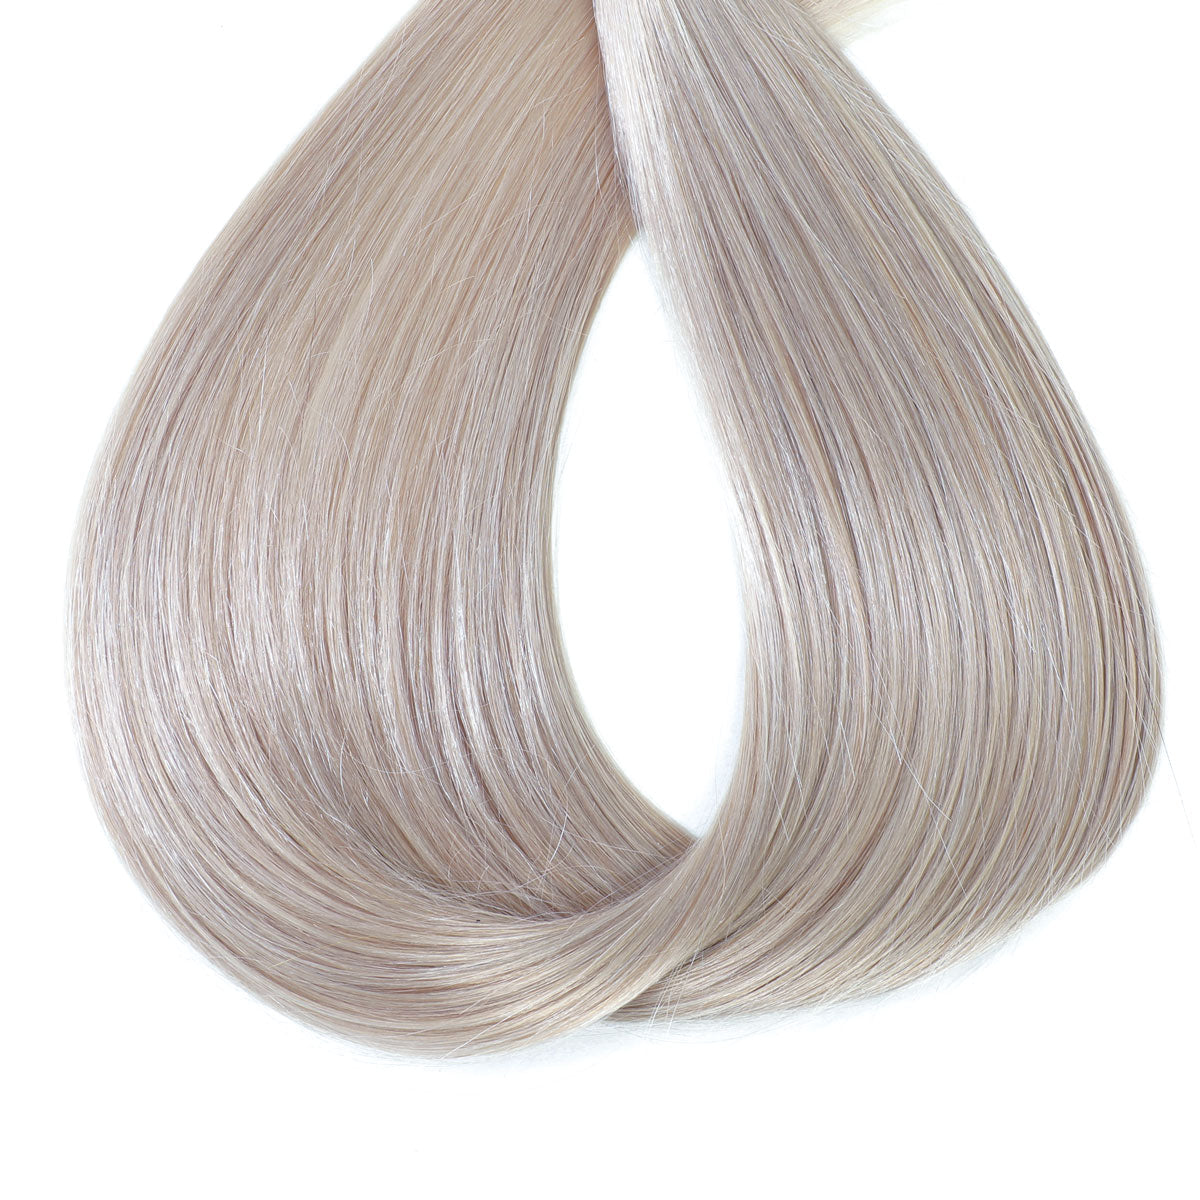 Real Human Hair Extensions for a seamless blend 